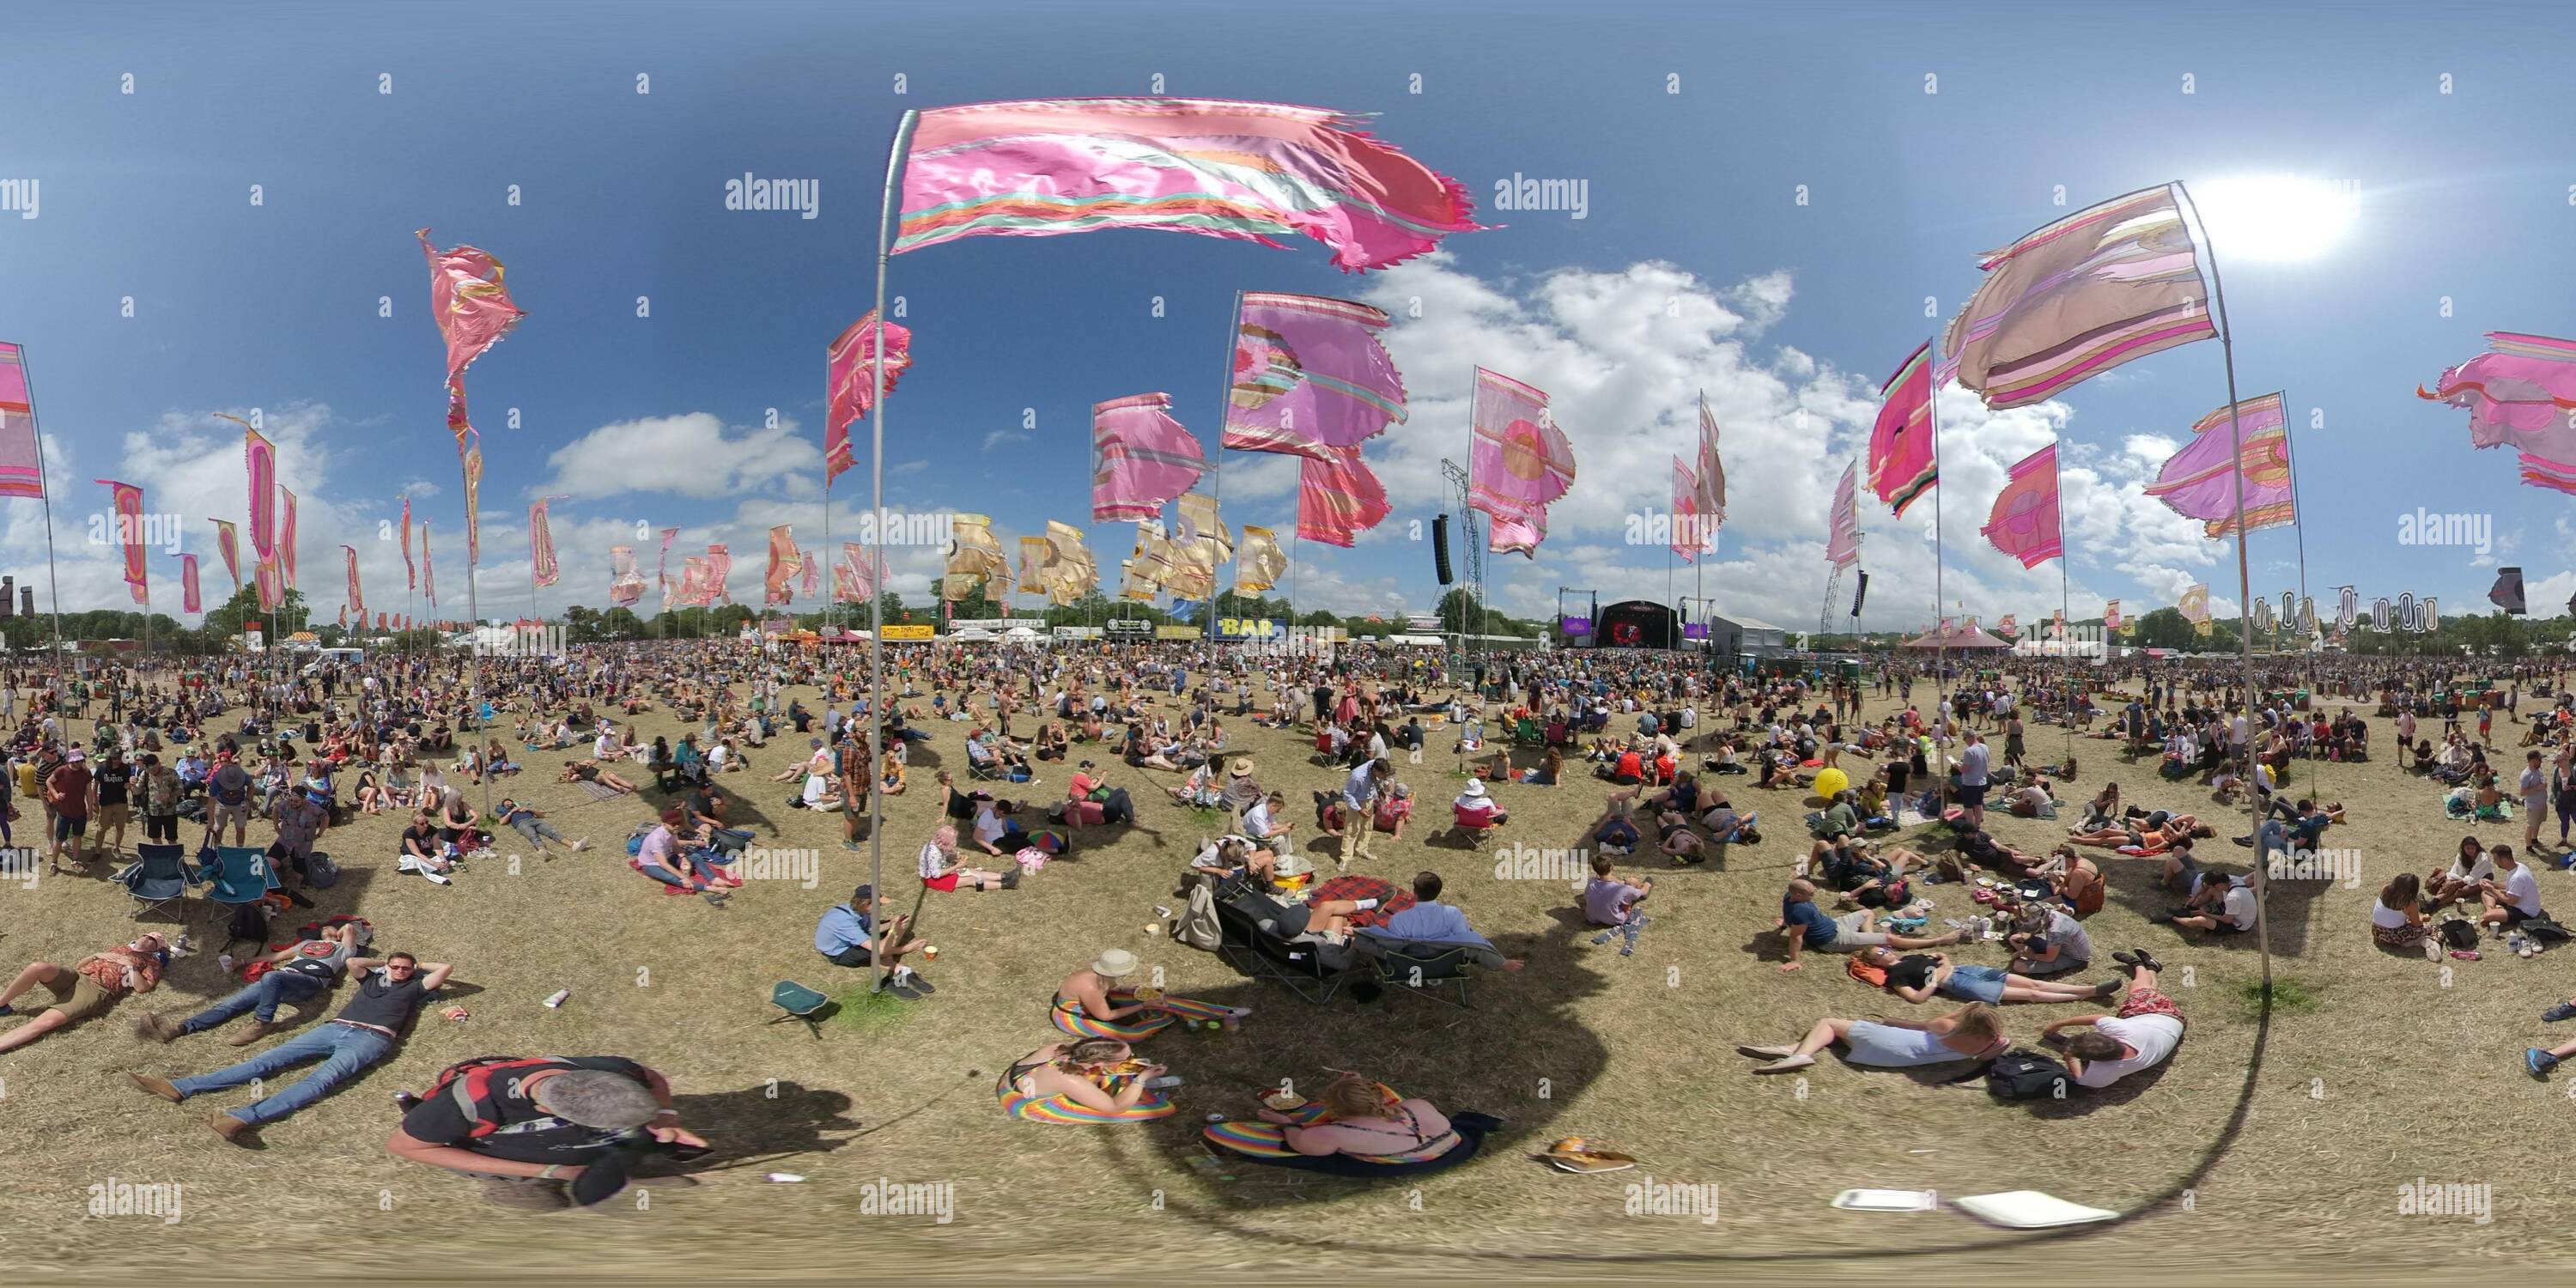 360 degree panoramic view of The West Holt Stage Glastonbury 2019